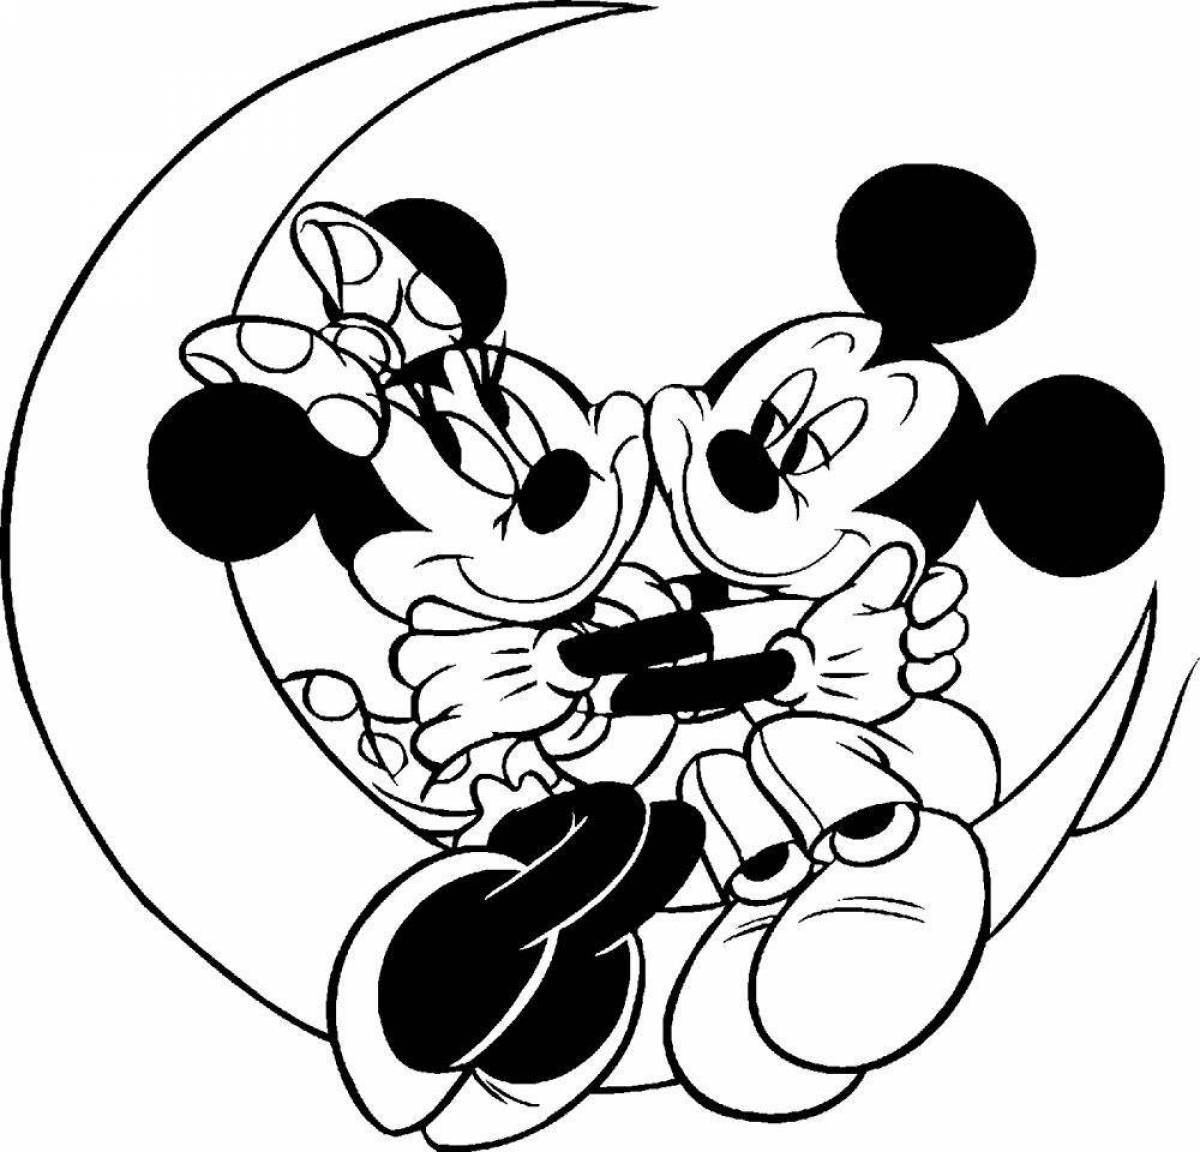 Colorful minnie mouse coloring page